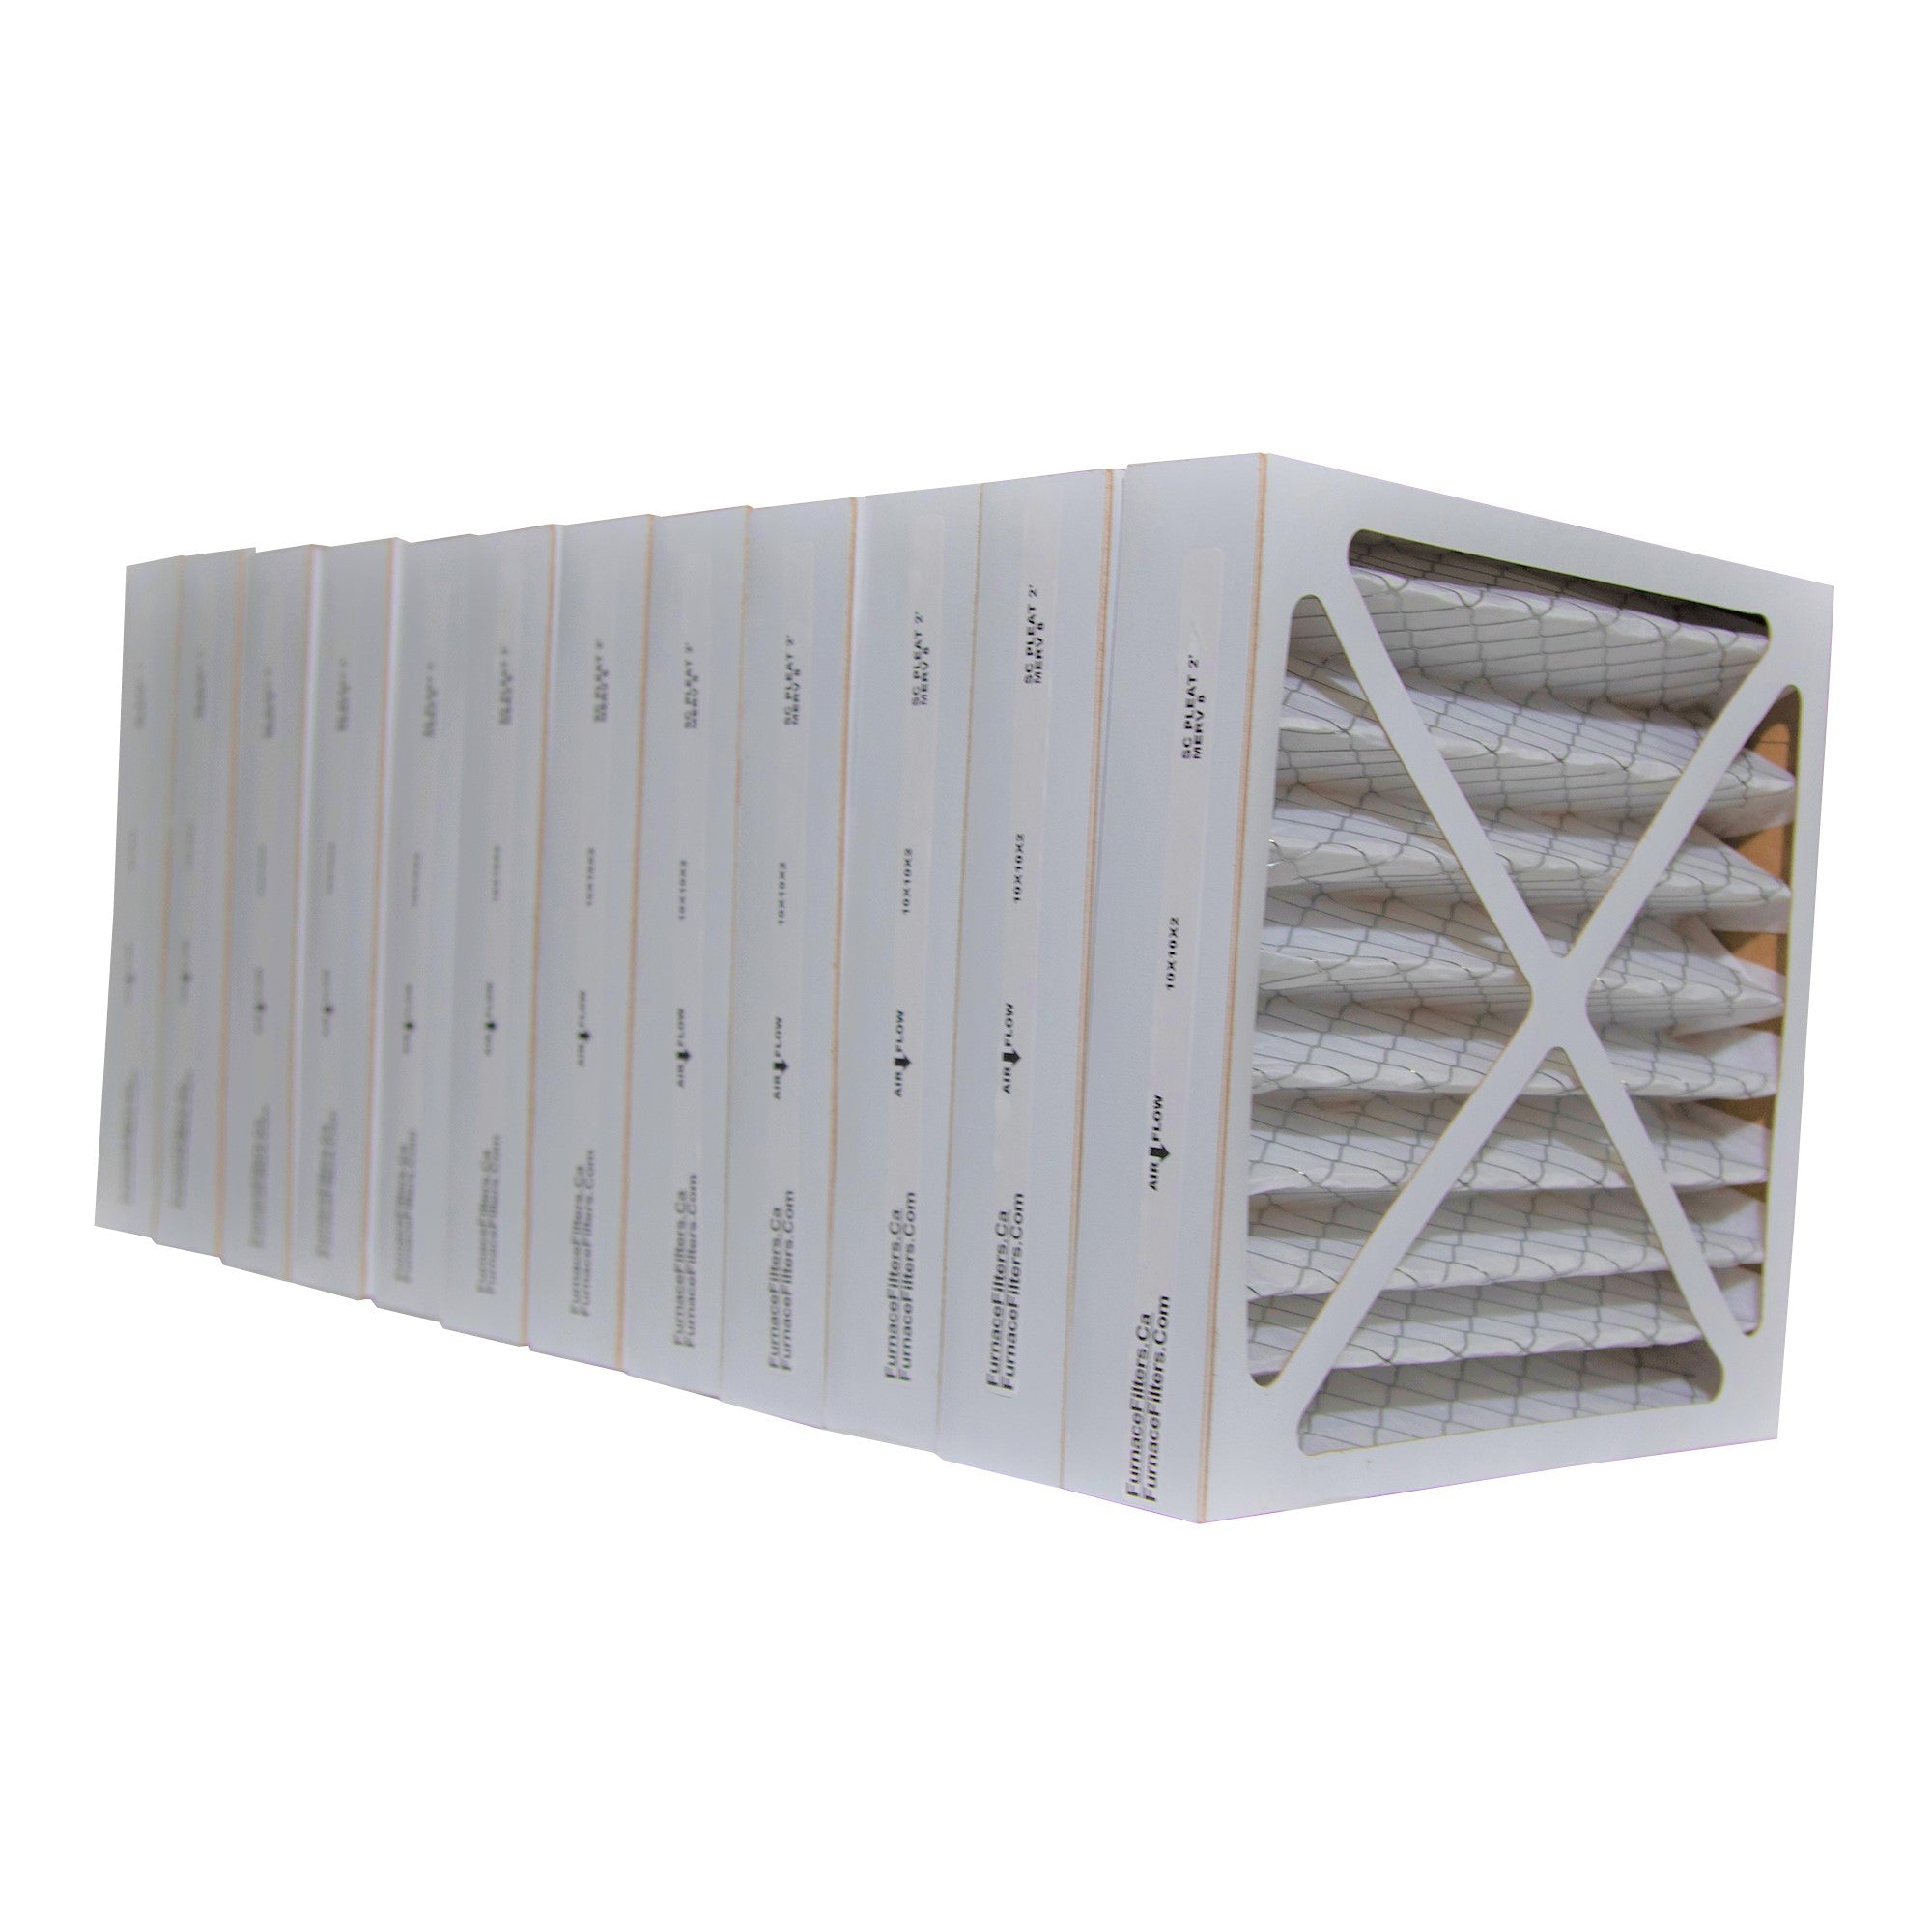 10x10x2 Furnace Filter MERV 8 Pleated Filters. Case of 12